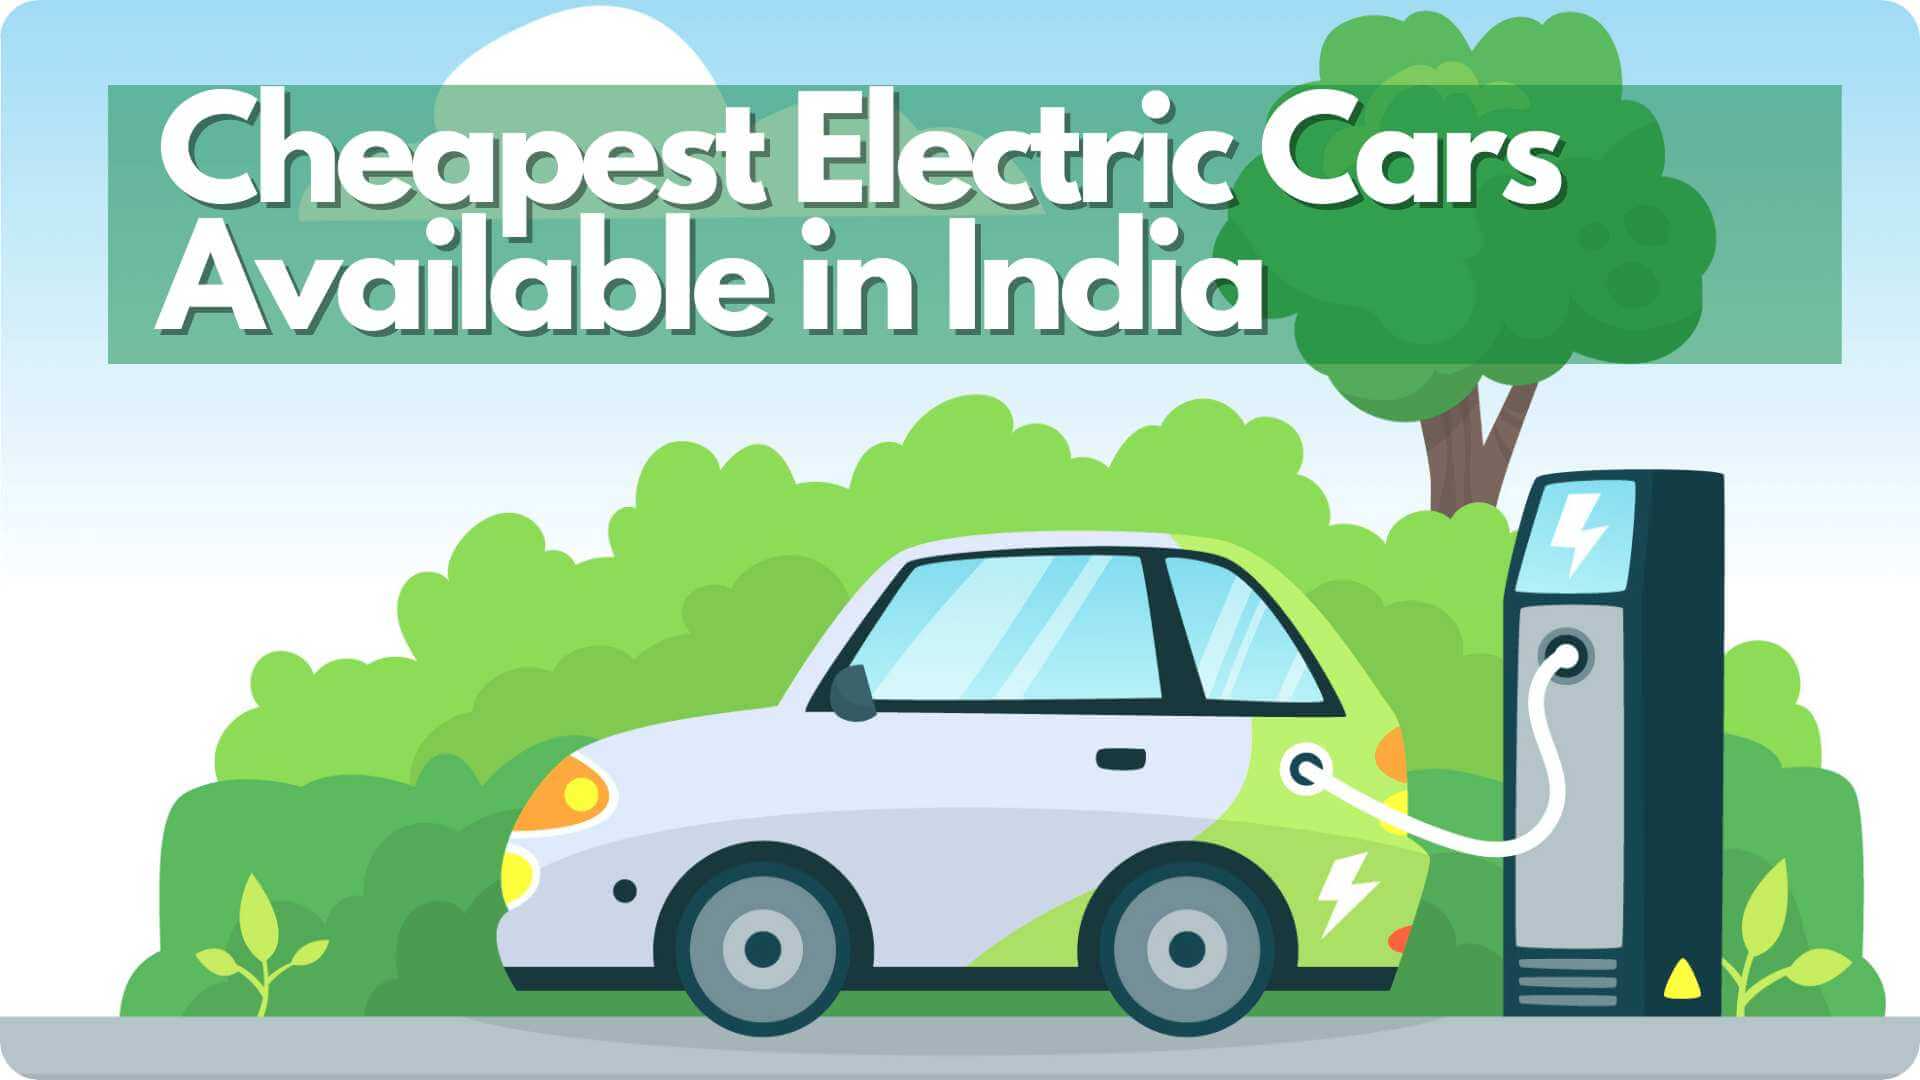 https://e-vehicleinfo.com/cheapest-electric-cars-available-in-india-best-electric-cars/